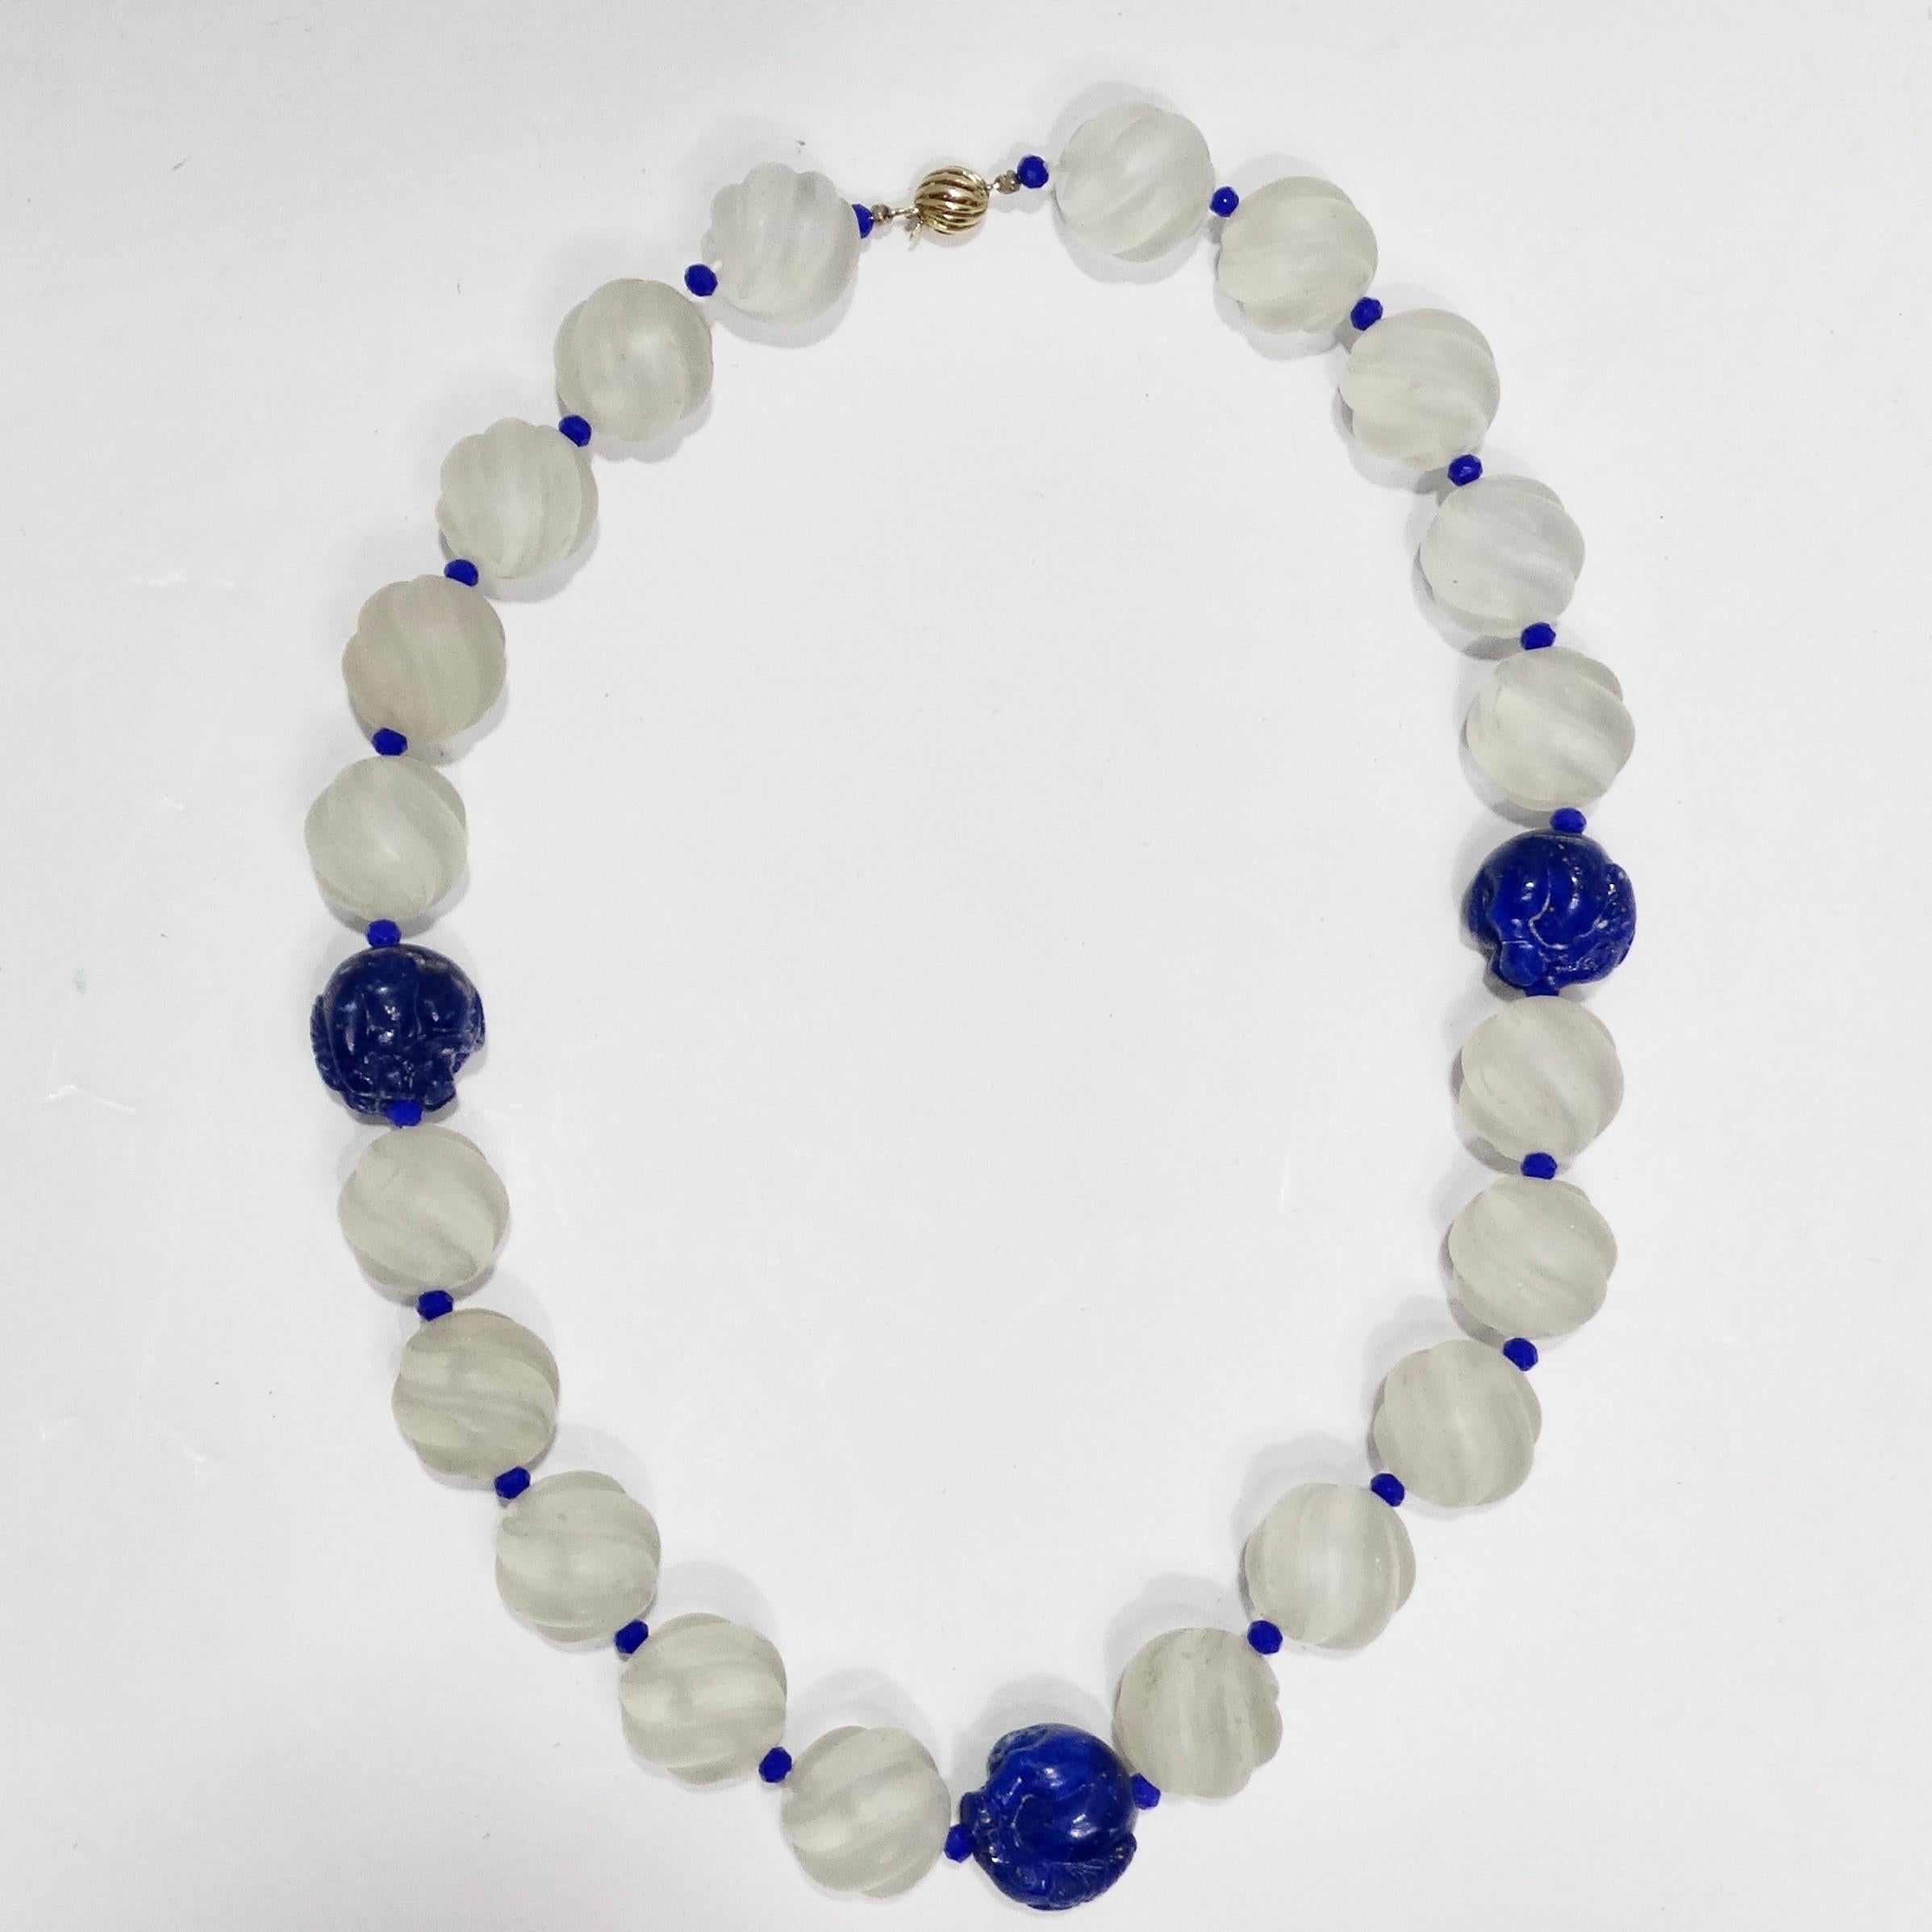 Introducing the Lapis Lazuli Crystal 14K Gold Beaded Necklace – a breathtaking piece that seamlessly marries the timeless allure of lapis lazuli with the luxury of 14K gold. Lapis lazuli, with its deep and vibrant blue hue, has been cherished for